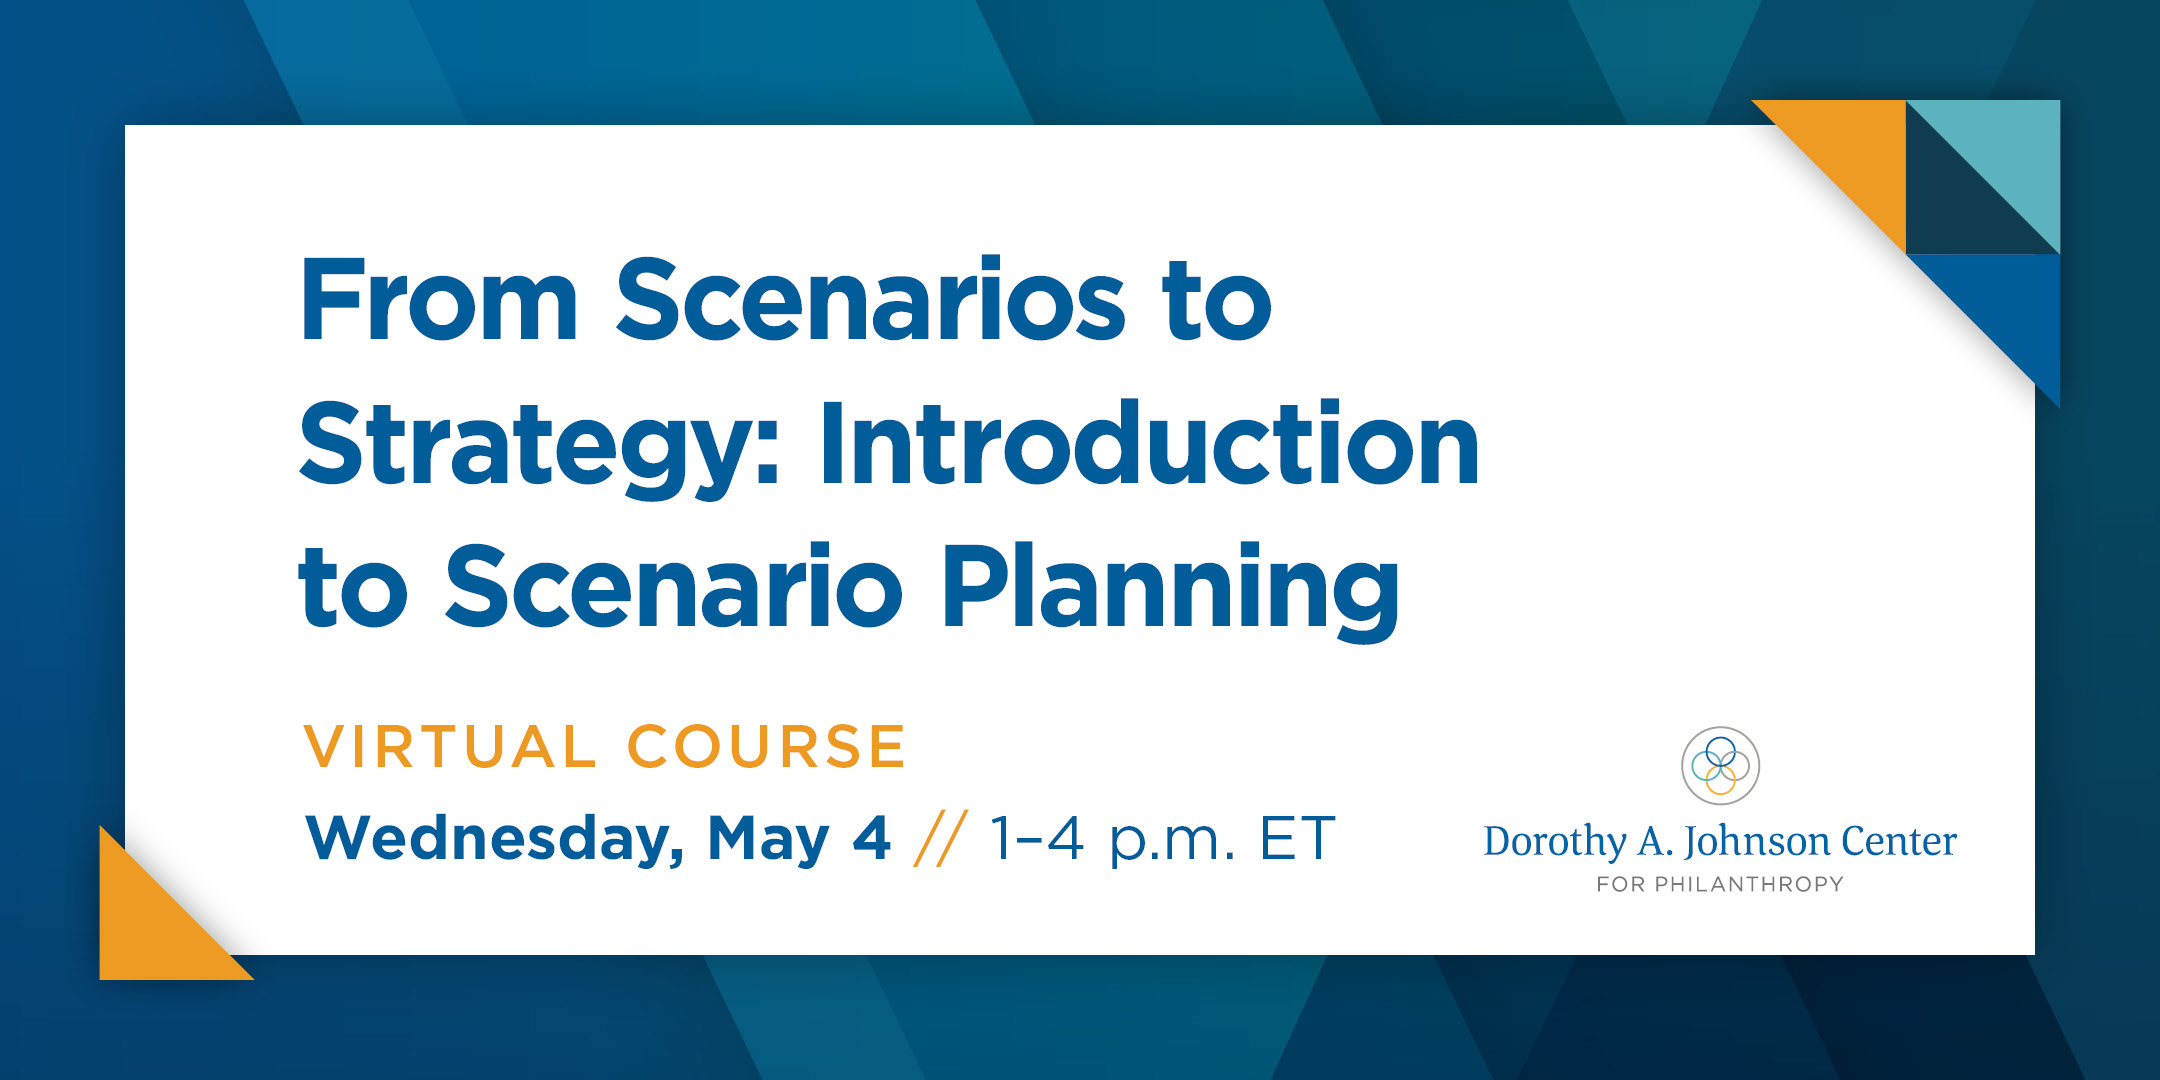 From Scenarios to Strategy: An Introduction to Scenario Planning